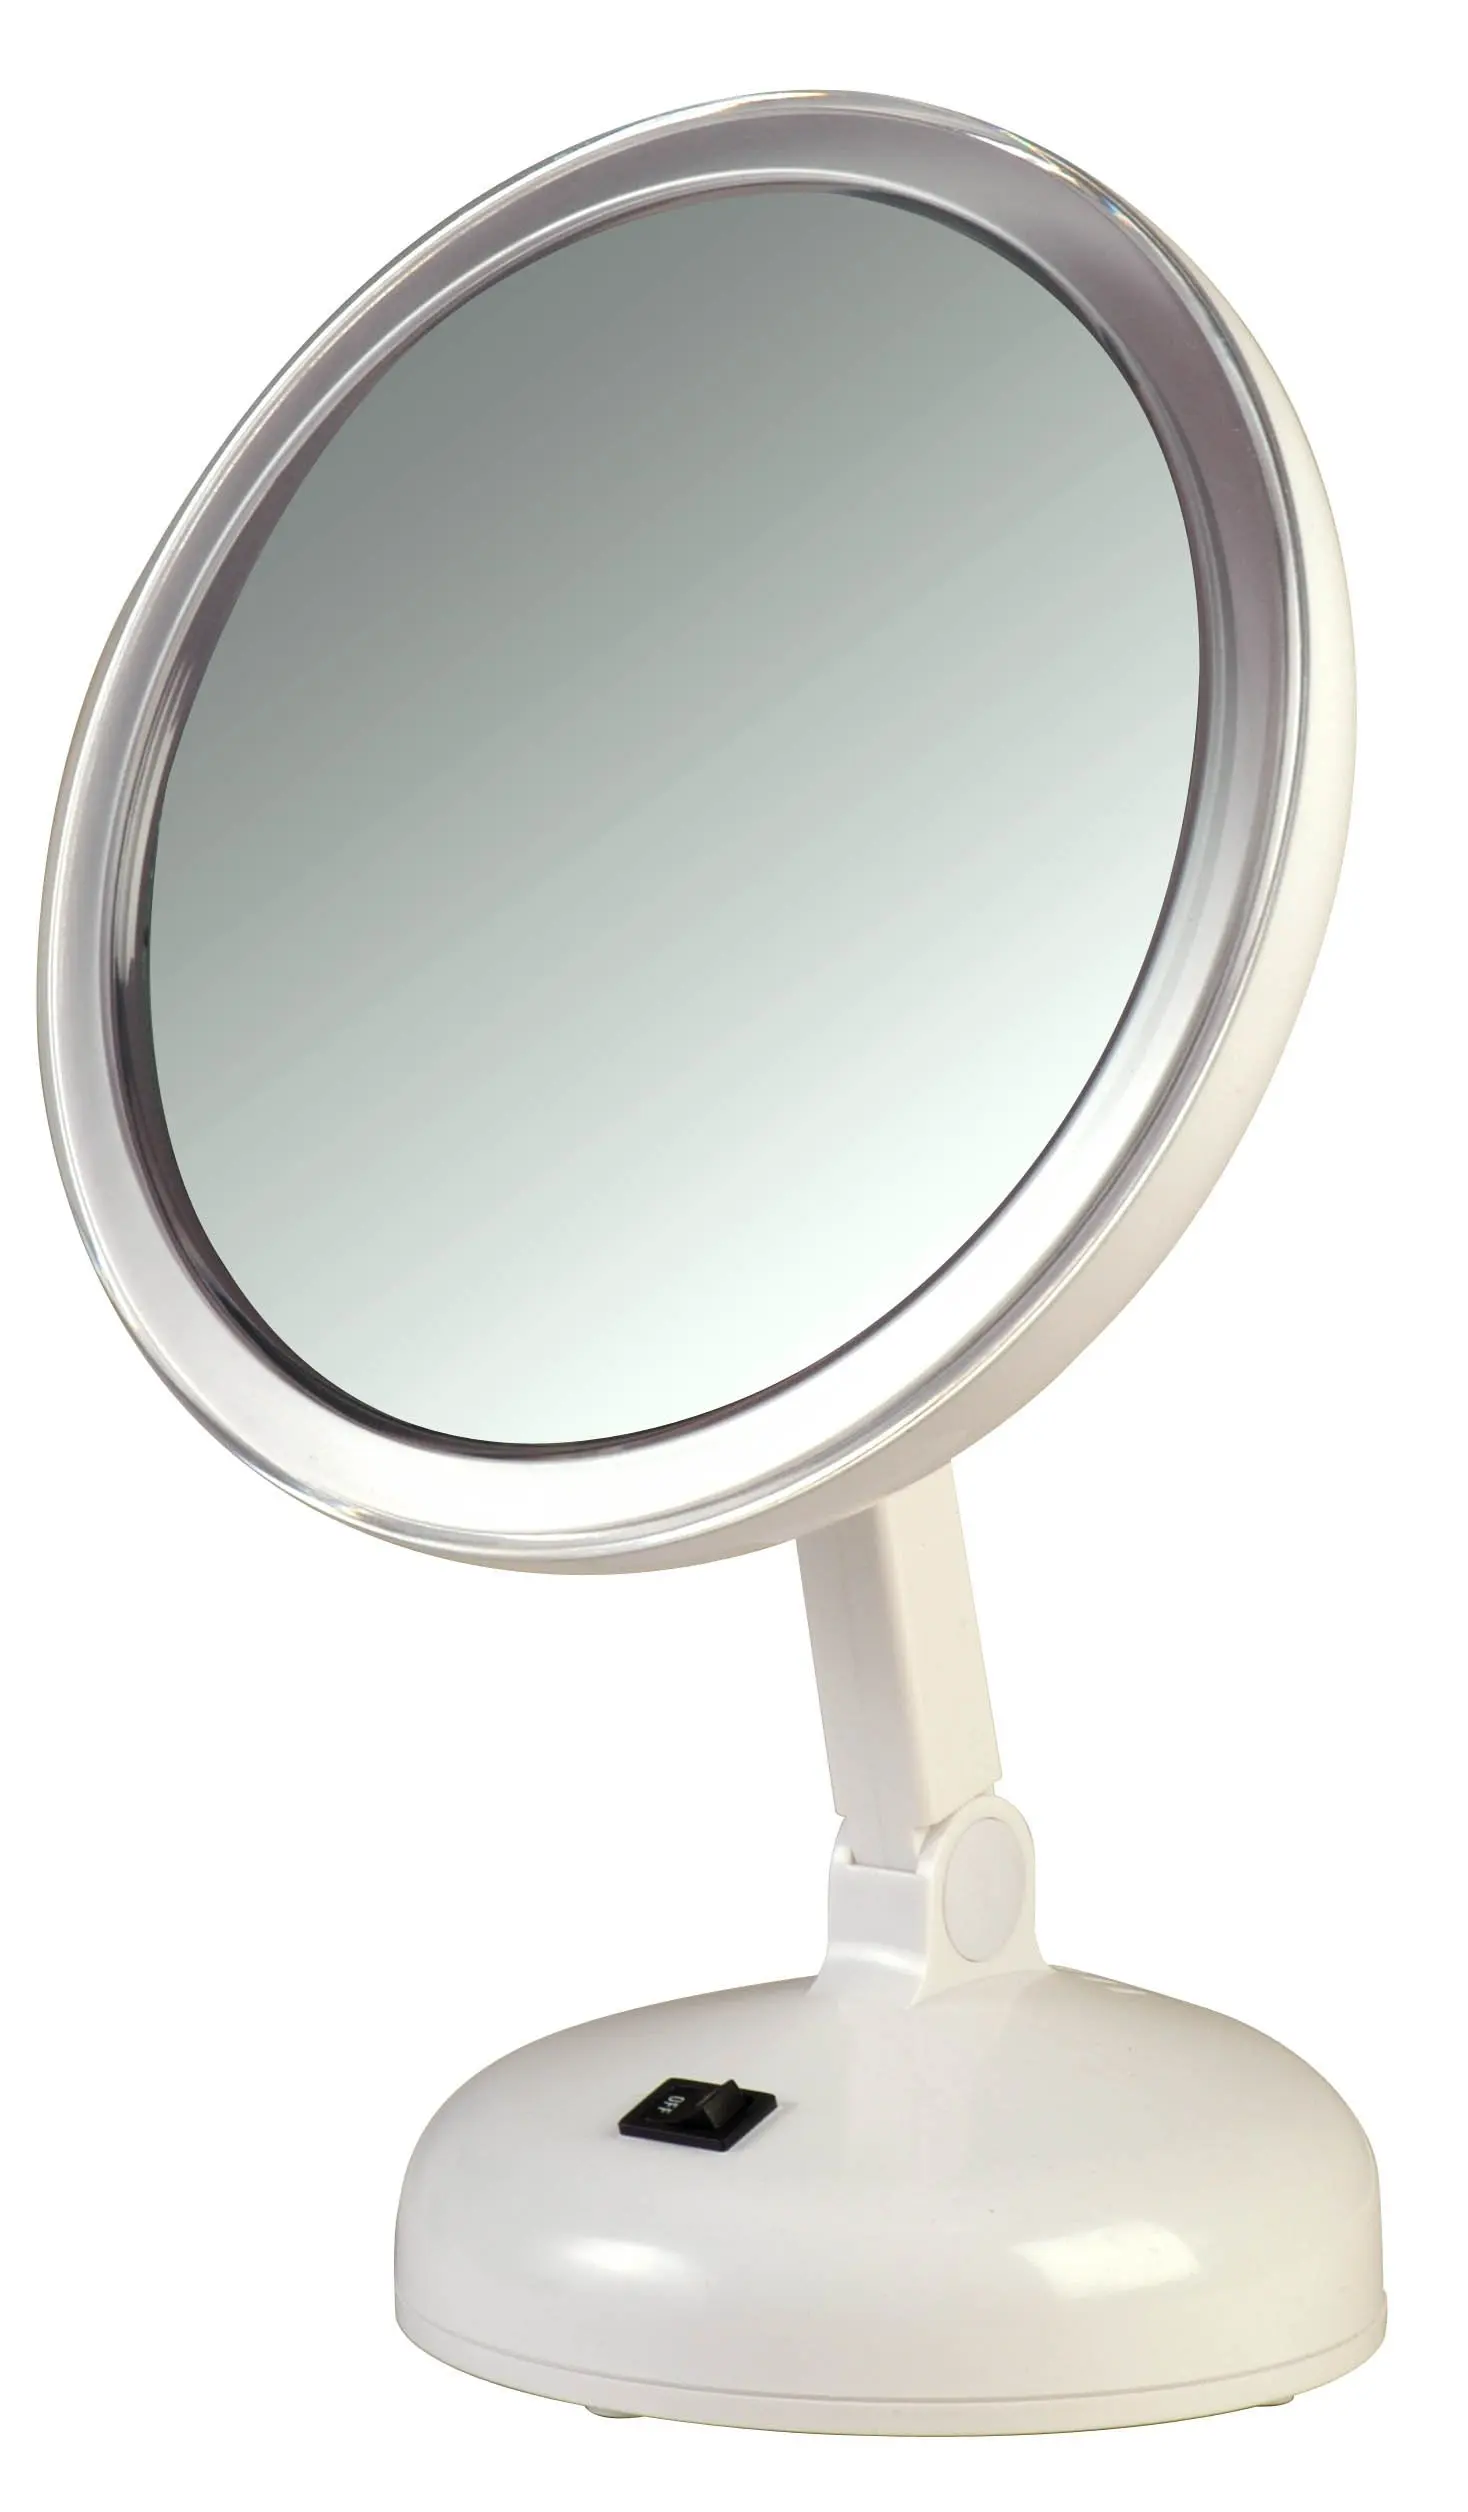 Floxite 7504-12l 12x LED Lighted Folding Vanity and Travel Mirror White Froste